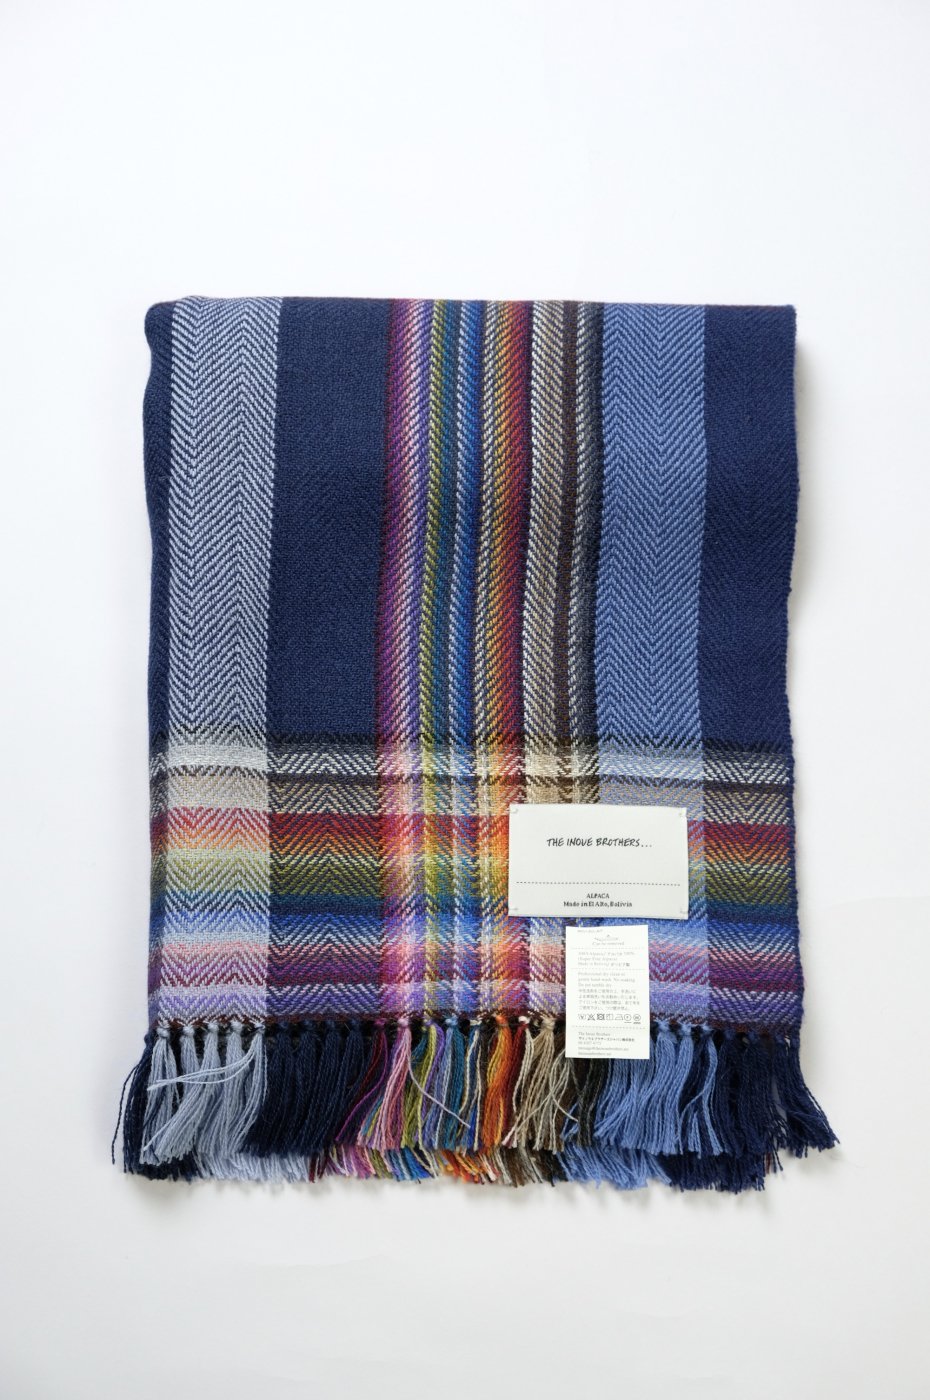 THE INOUE BROTHERS... "Multi Coloured Scarf/NAVY"